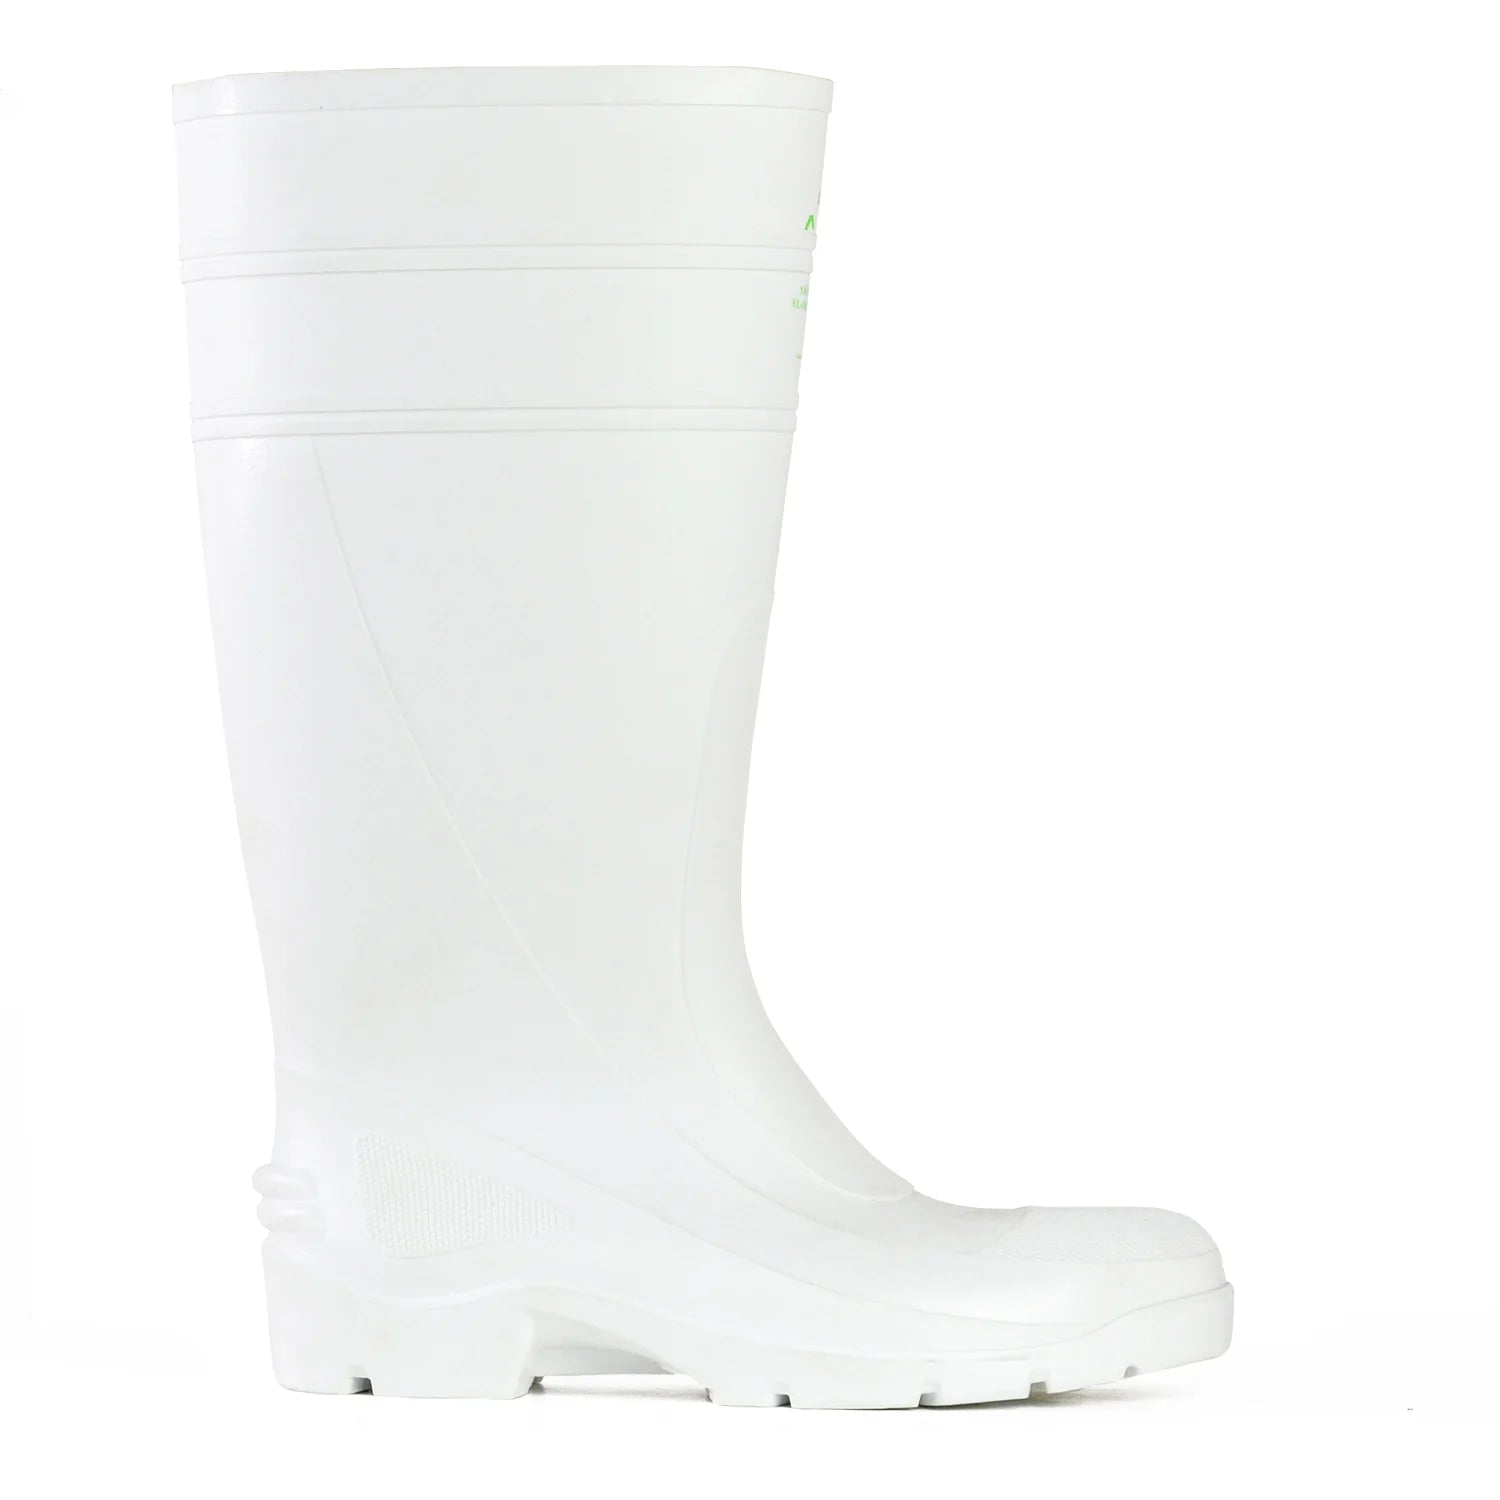 White Safety Gumboot - made by Bata Industrial